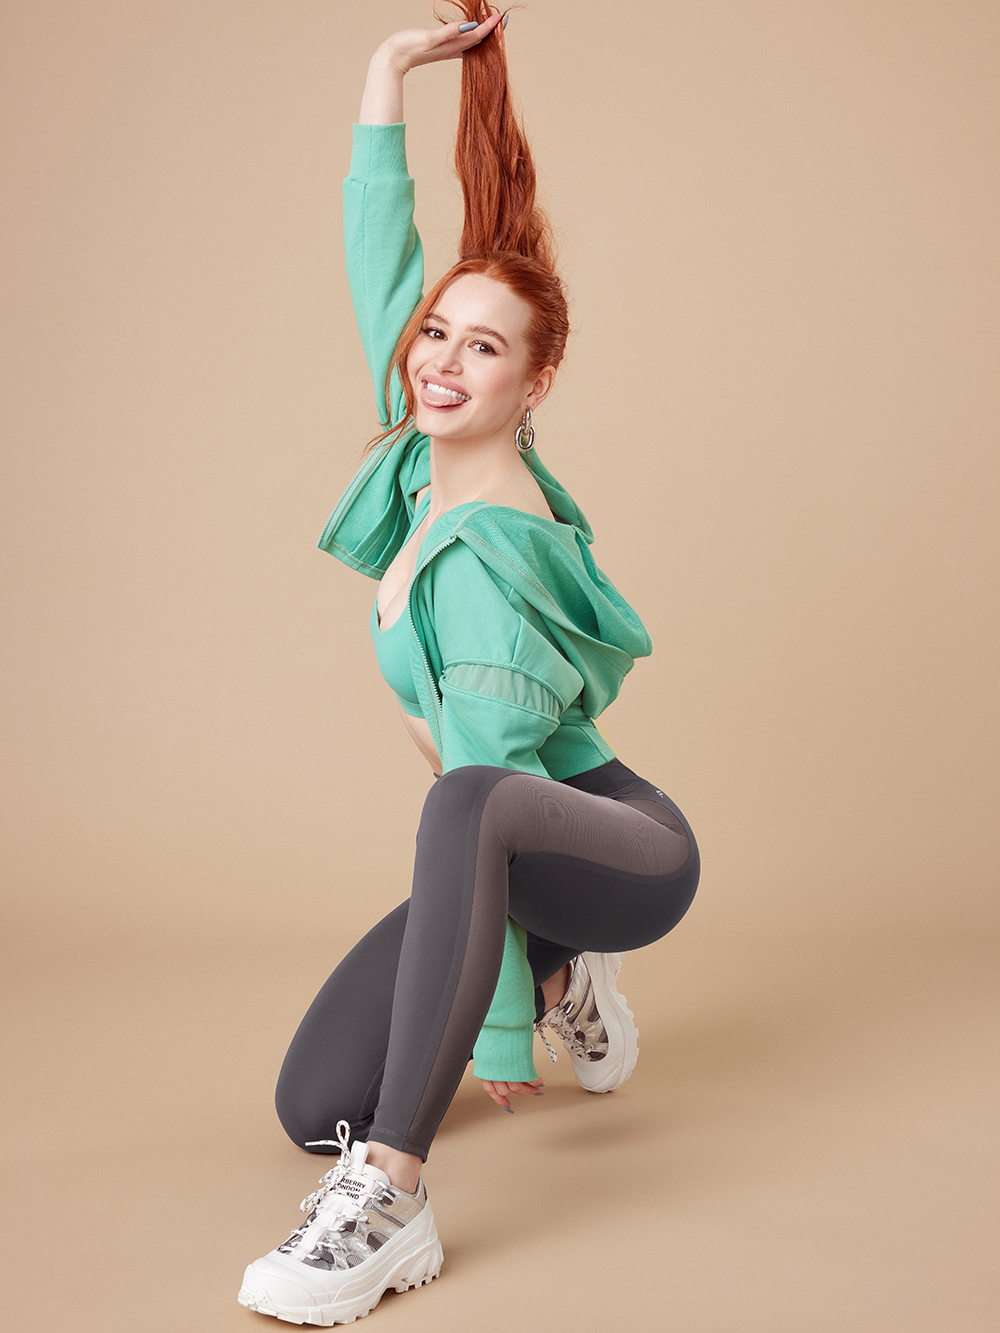 Minimize form Purple Madelaine Petsch on How She Gets Motivated for Workouts | TheThirty